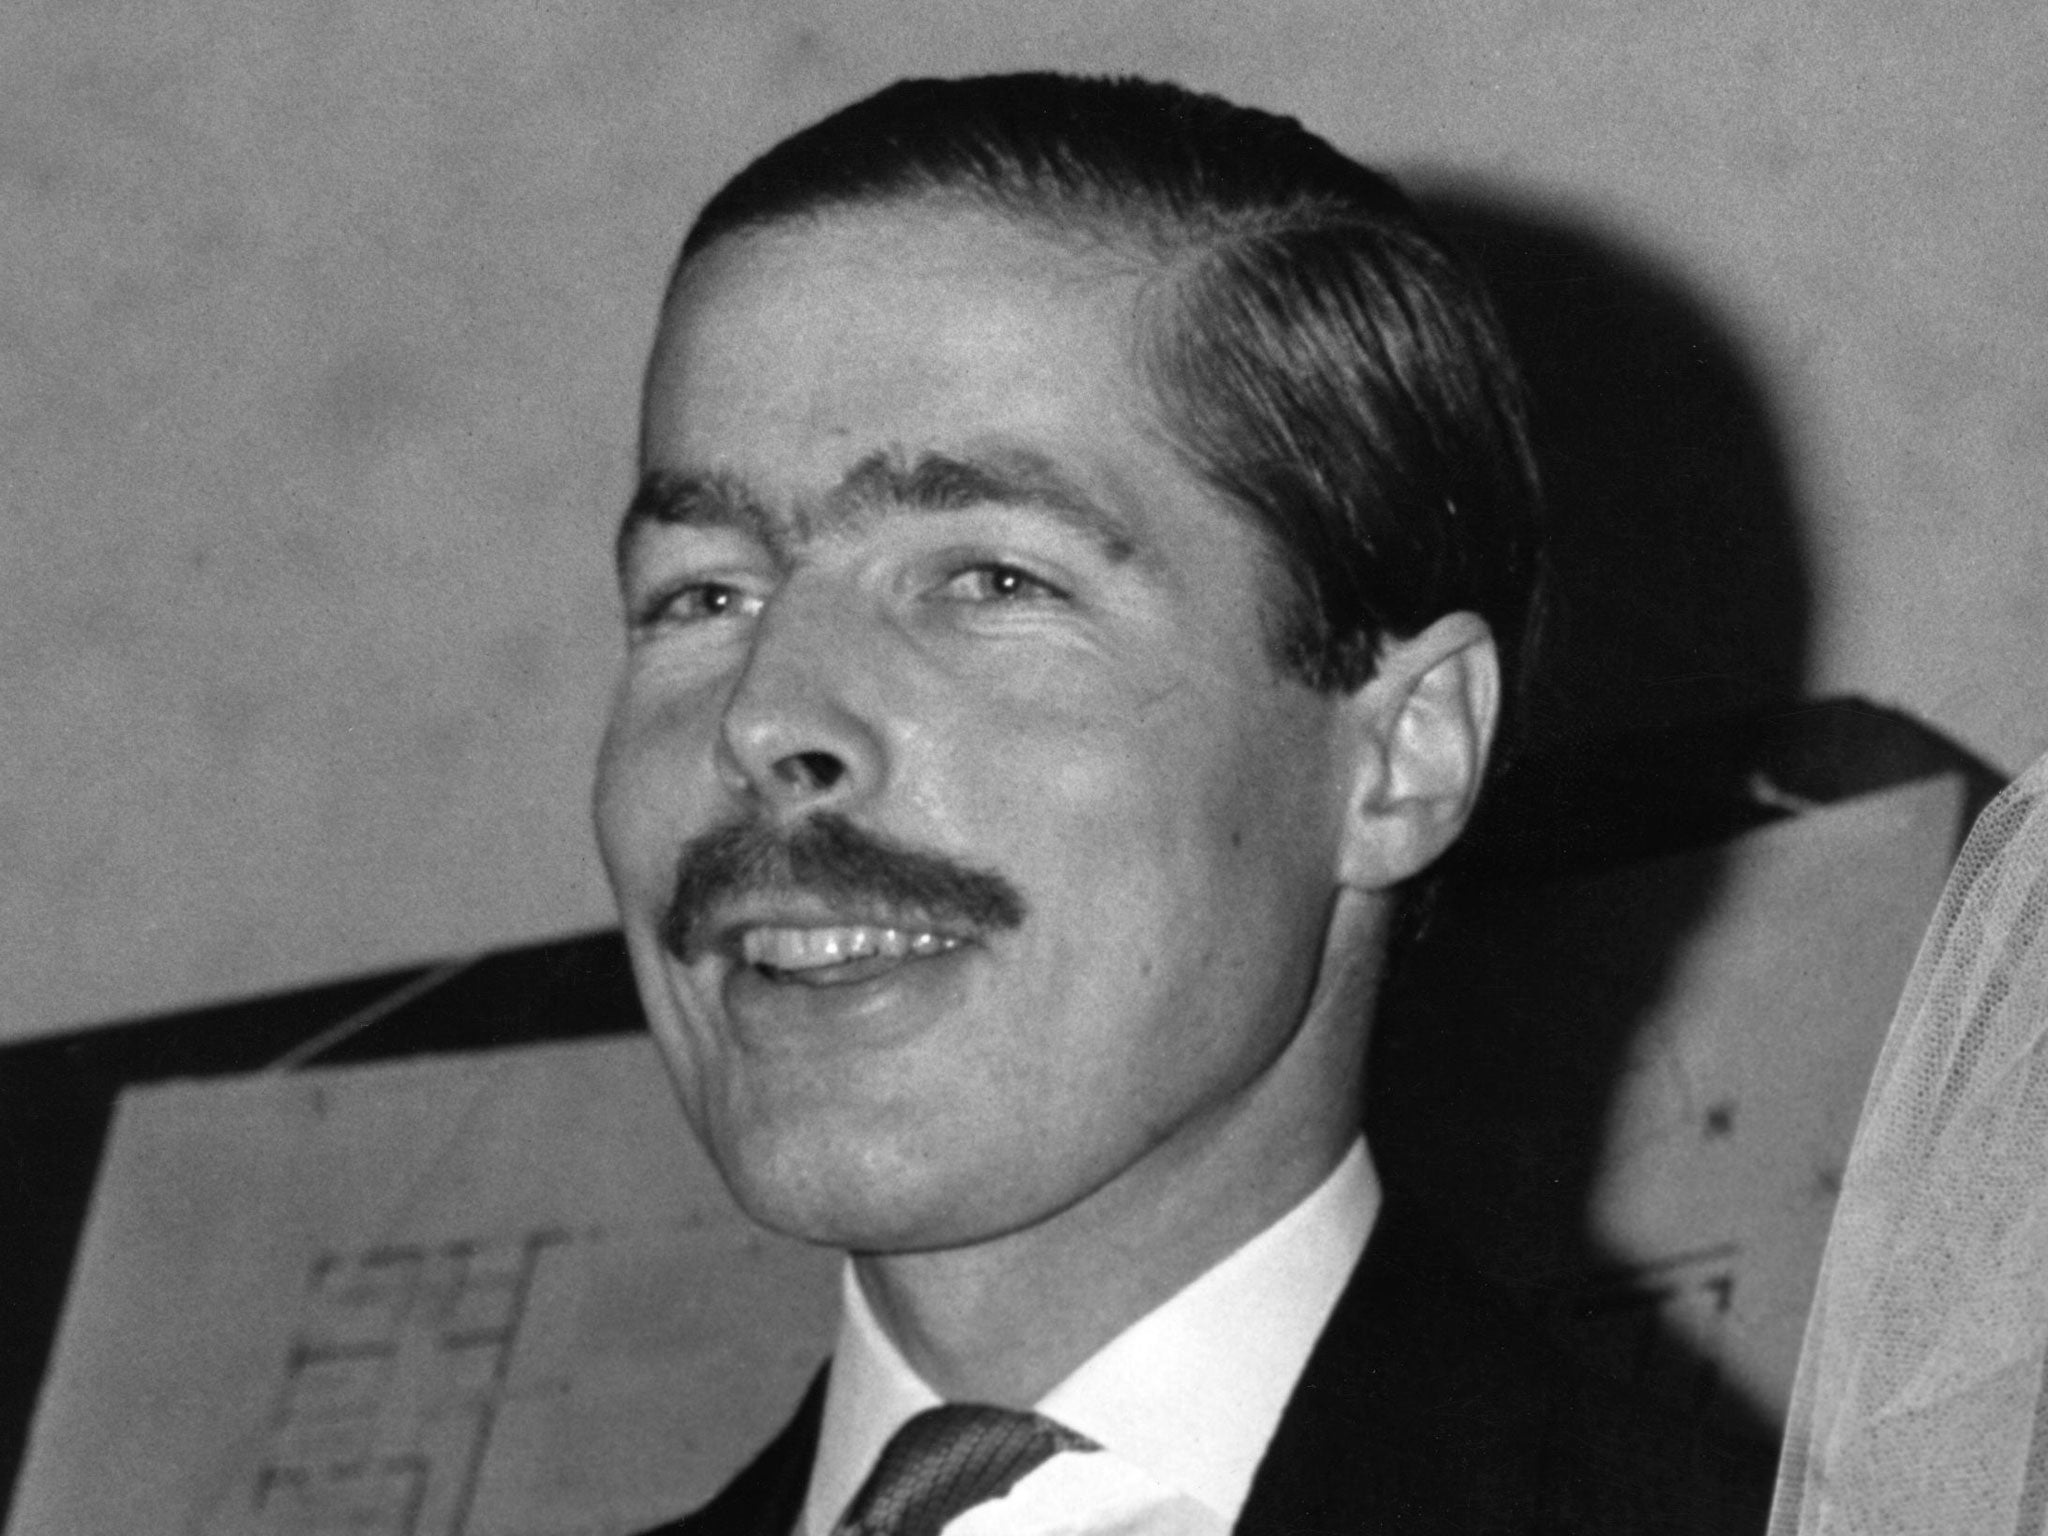 Lord Lucan, aristocrat and alleged murderer, on his wedding day in 1963